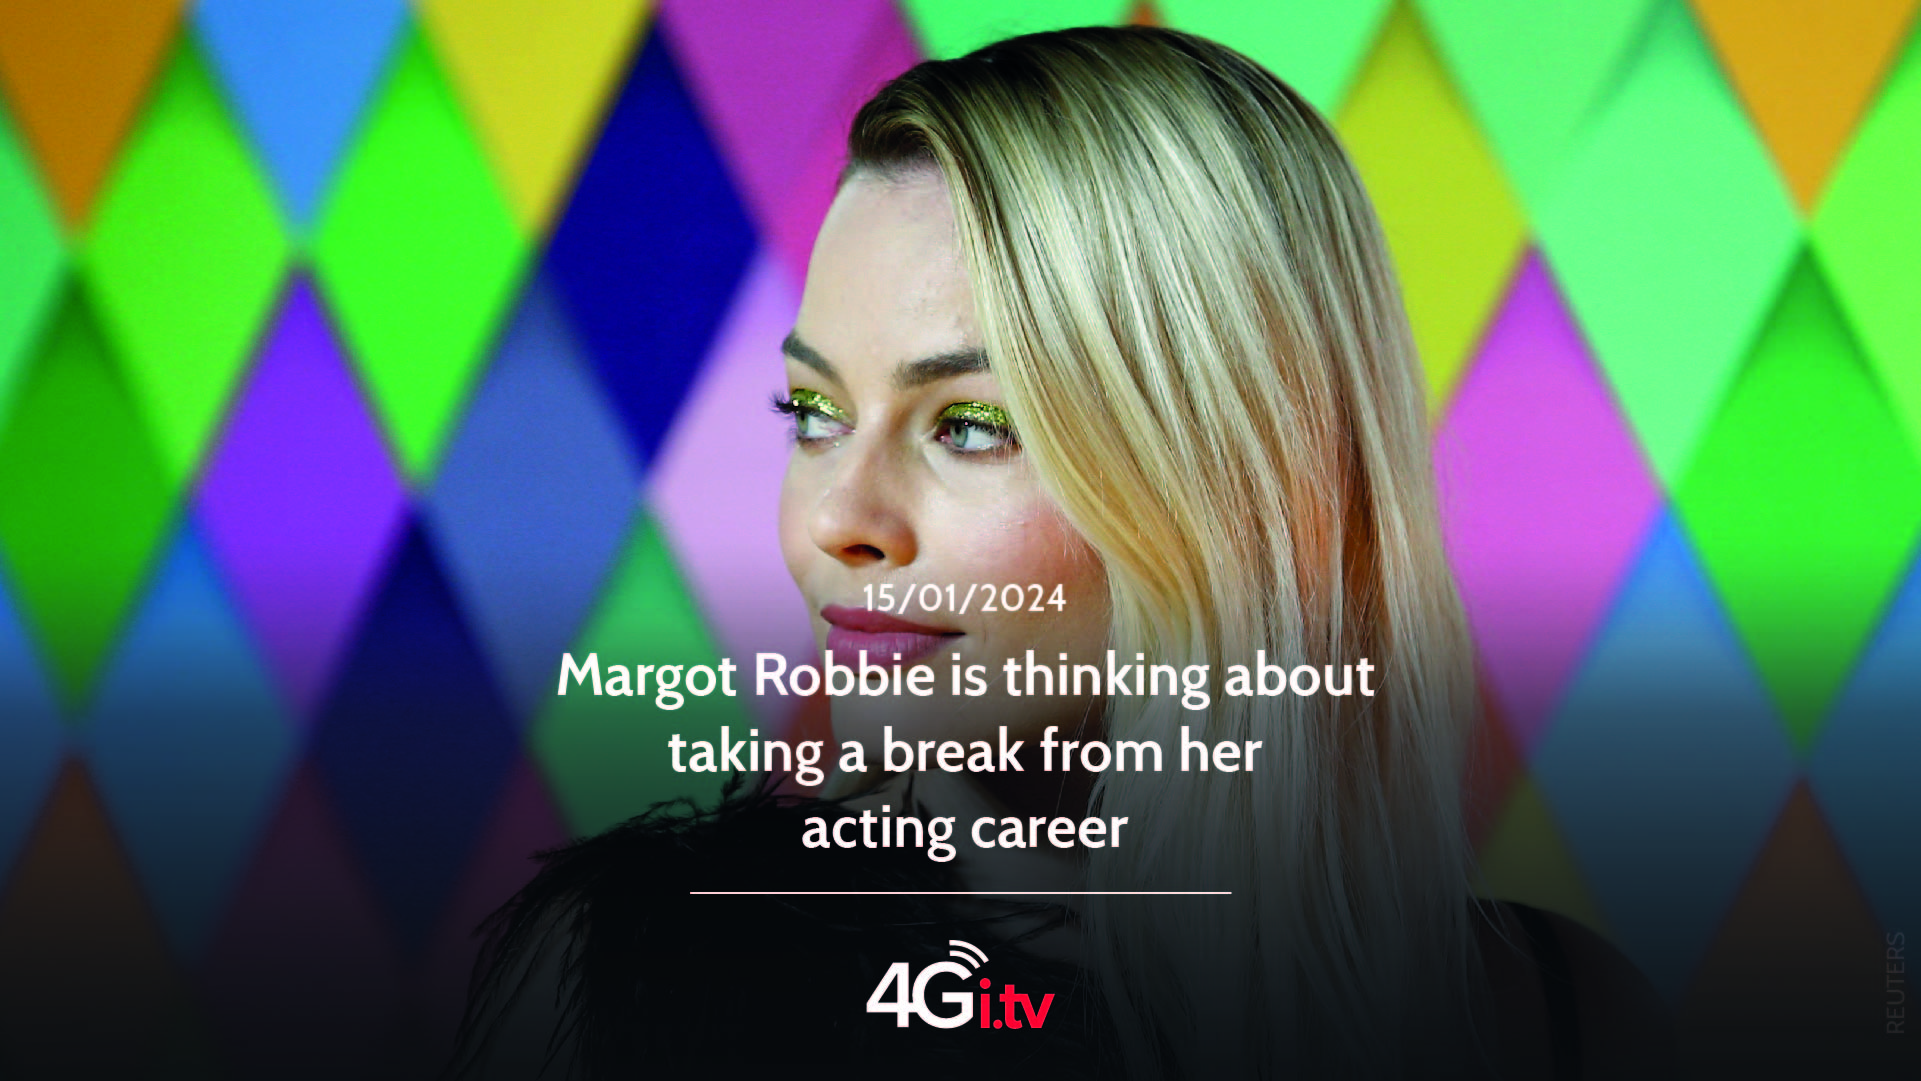 Подробнее о статье Margot Robbie is thinking about taking a break from her acting career 